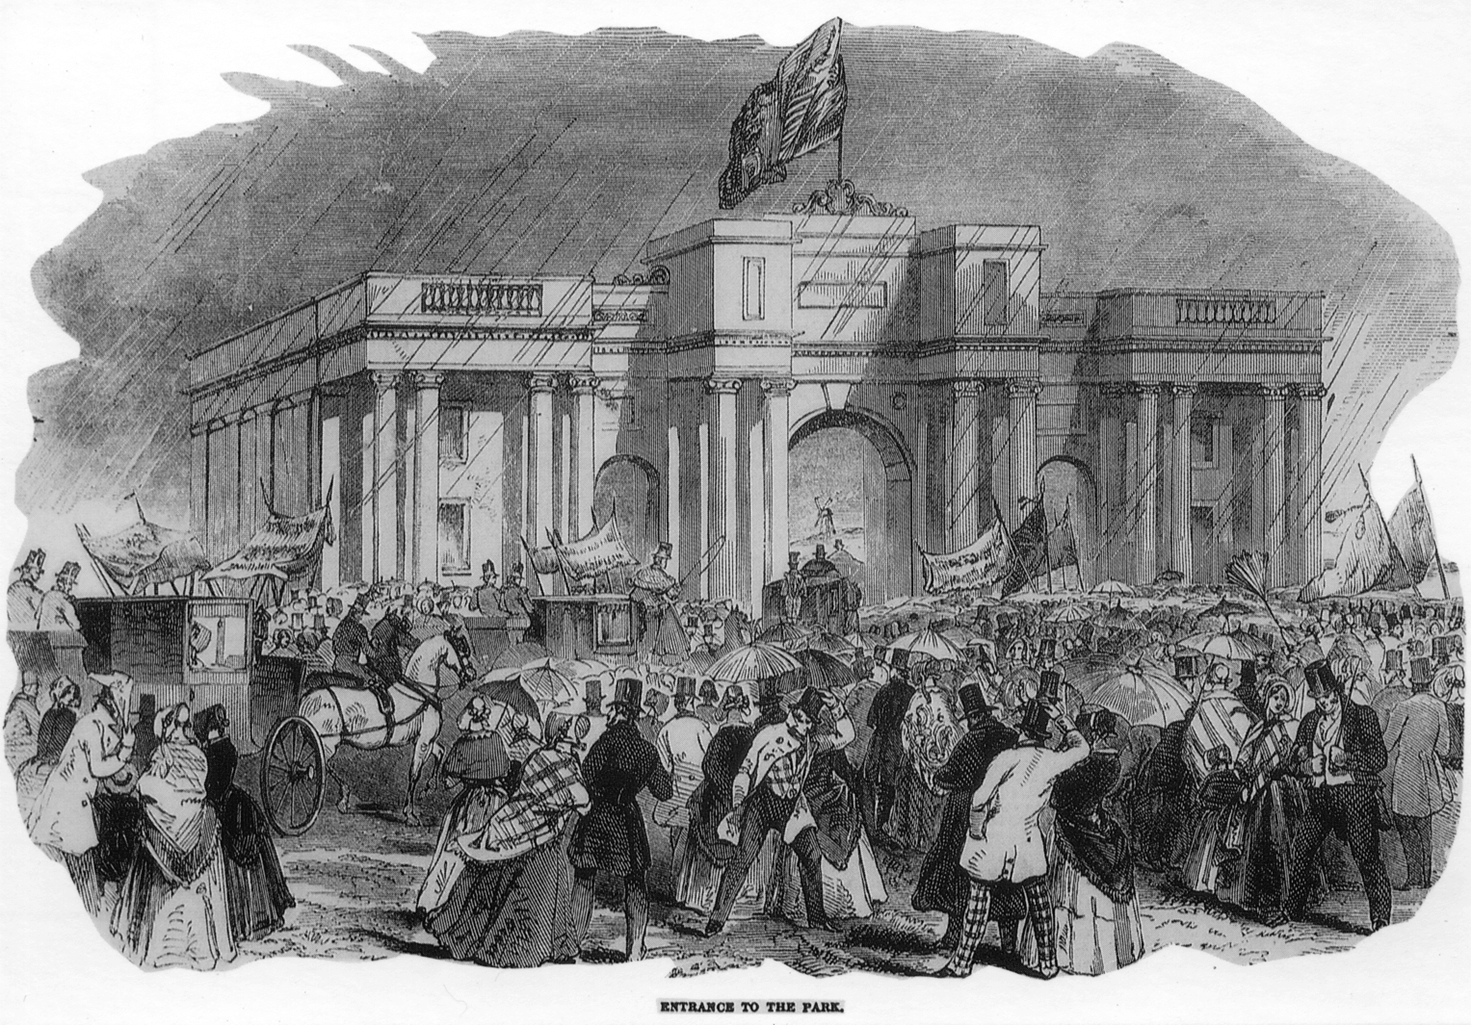 Print representing a crowd from the Victorian period in front of the Grand Entrance